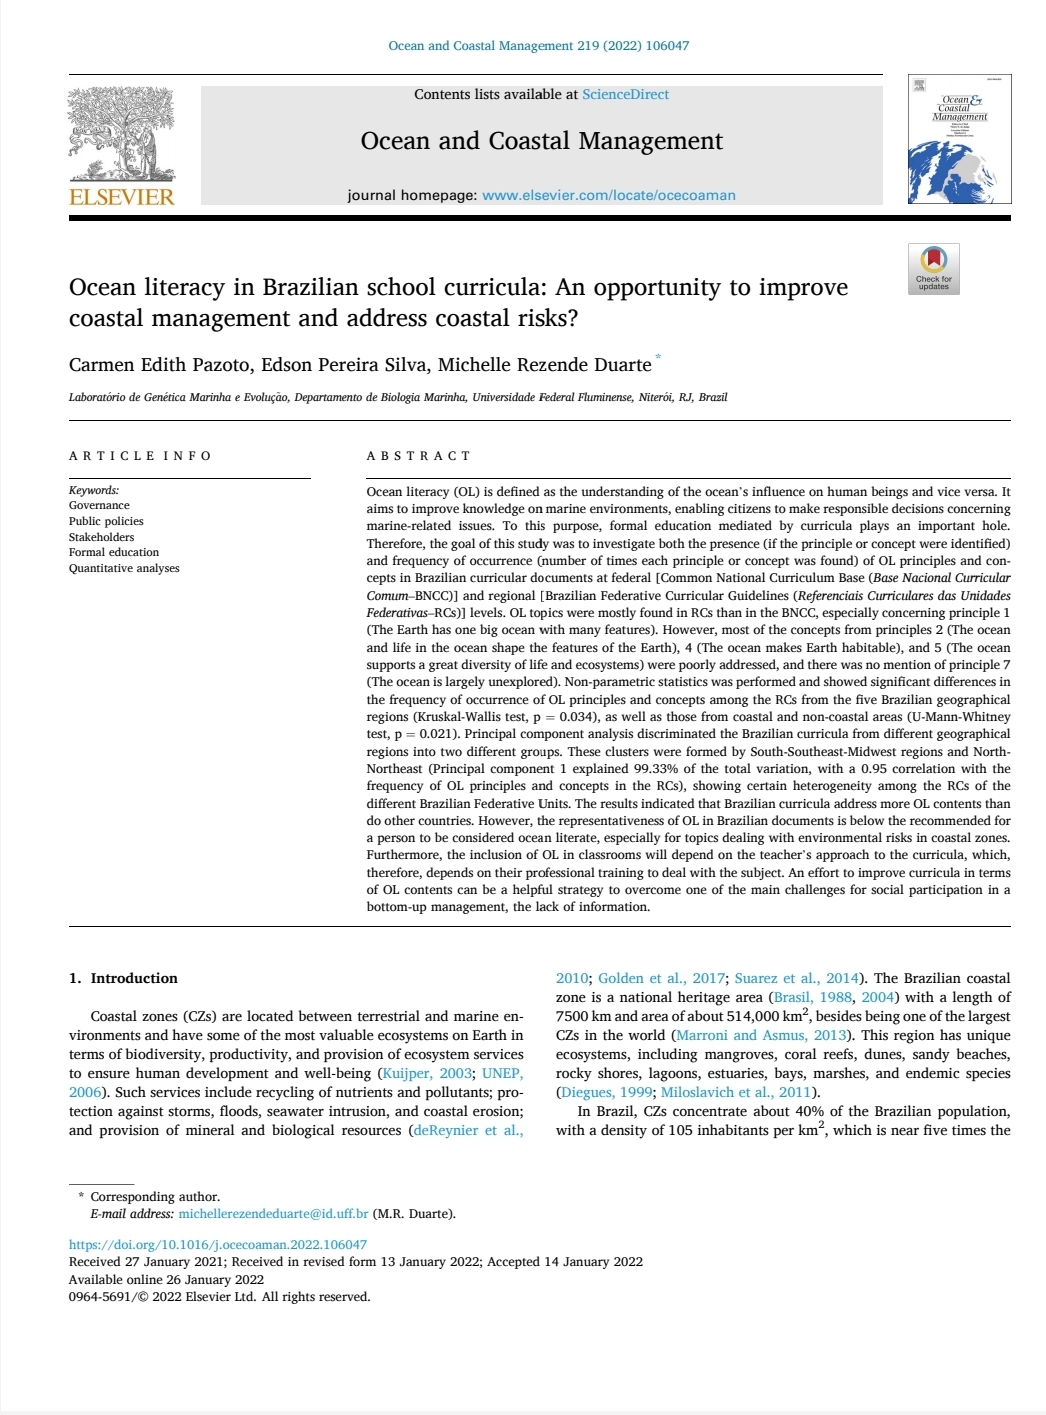 Ocean literacy in Brazilian school curricula: An opportunity to improve  coastal management and address coastal risks?